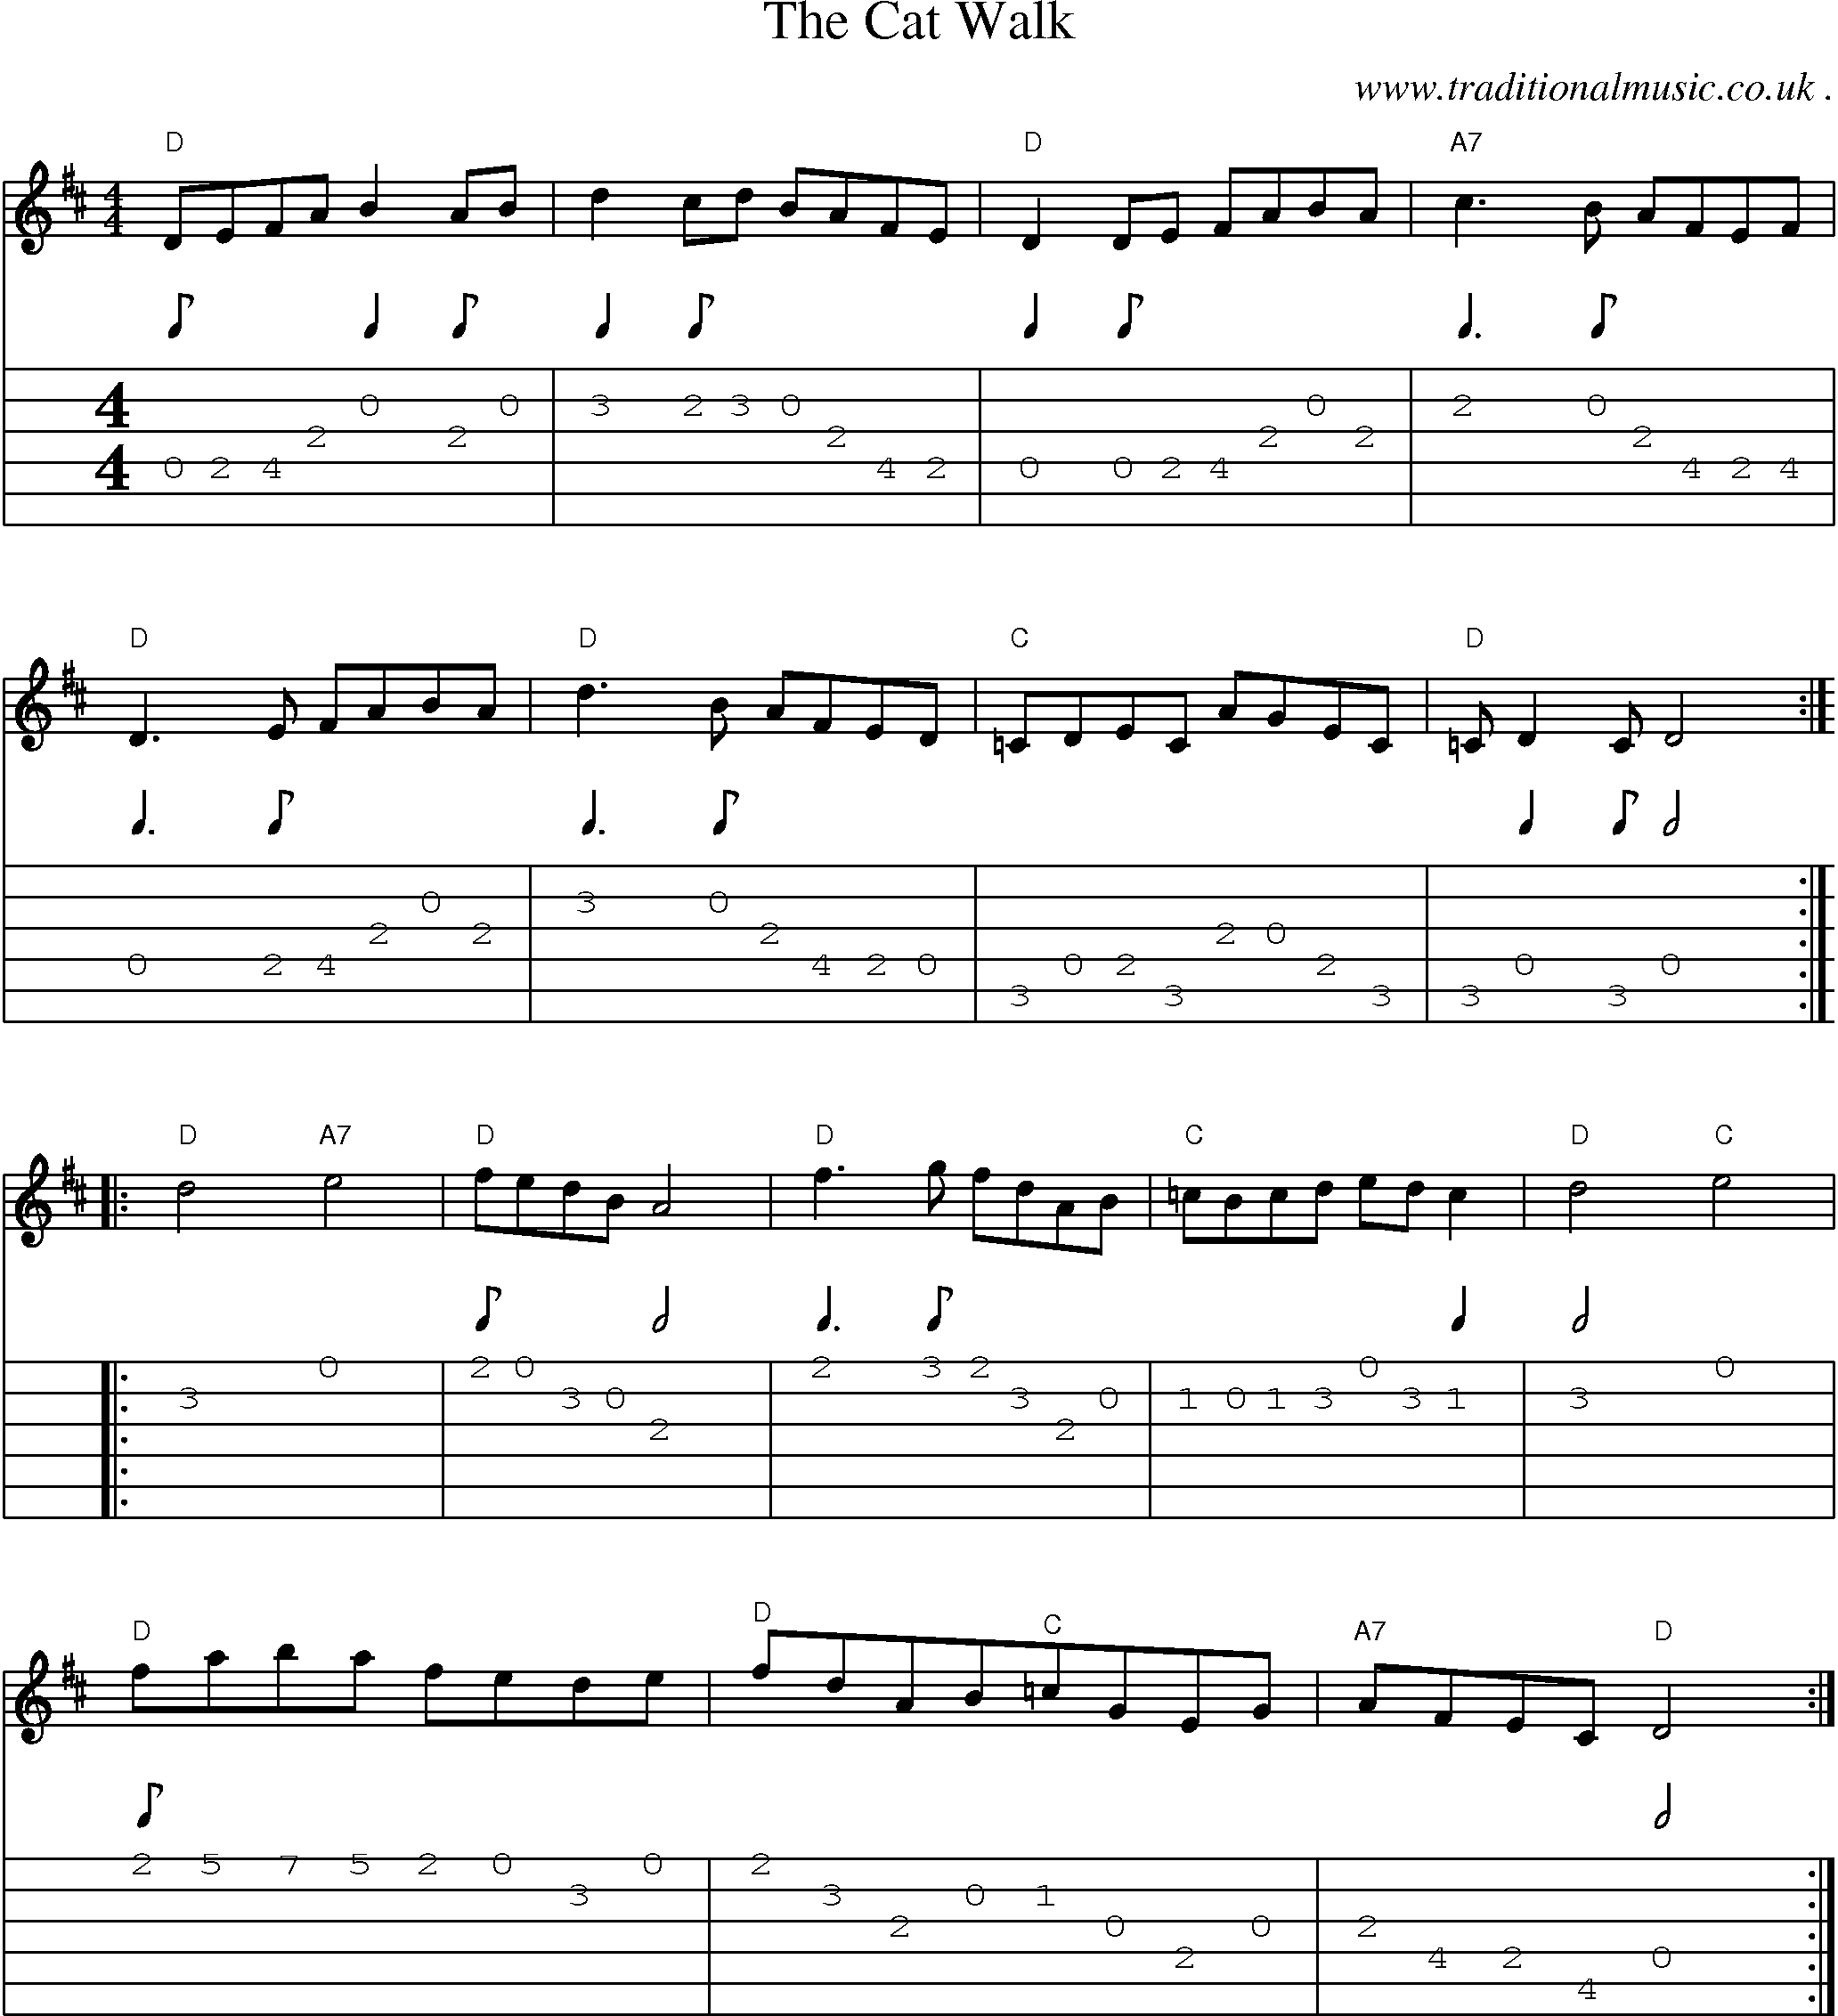 Sheet-Music and Guitar Tabs for The Cat Walk